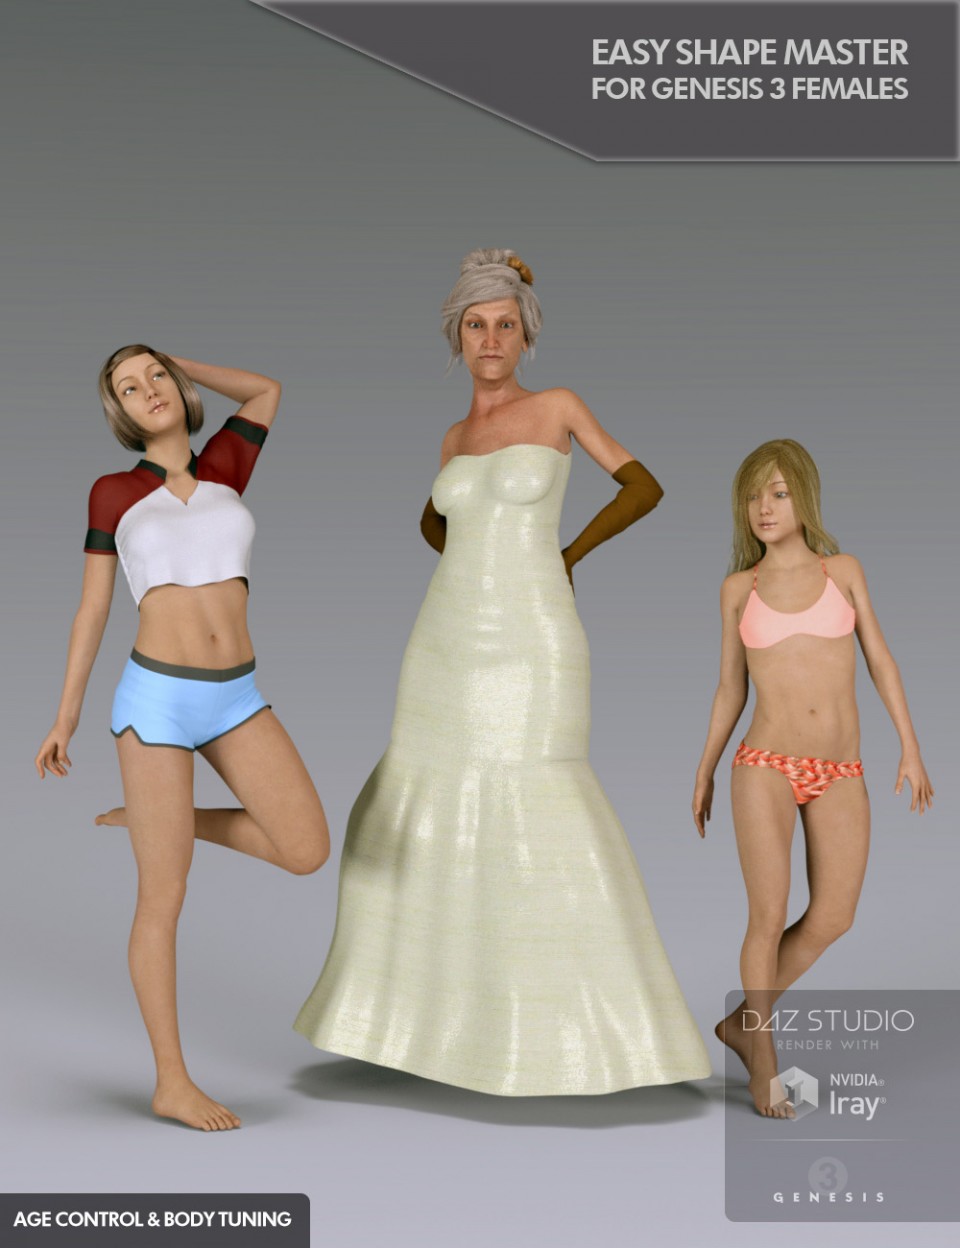 Easy Shape Master - Age Control and Body Tuning for Genesis 3 Female